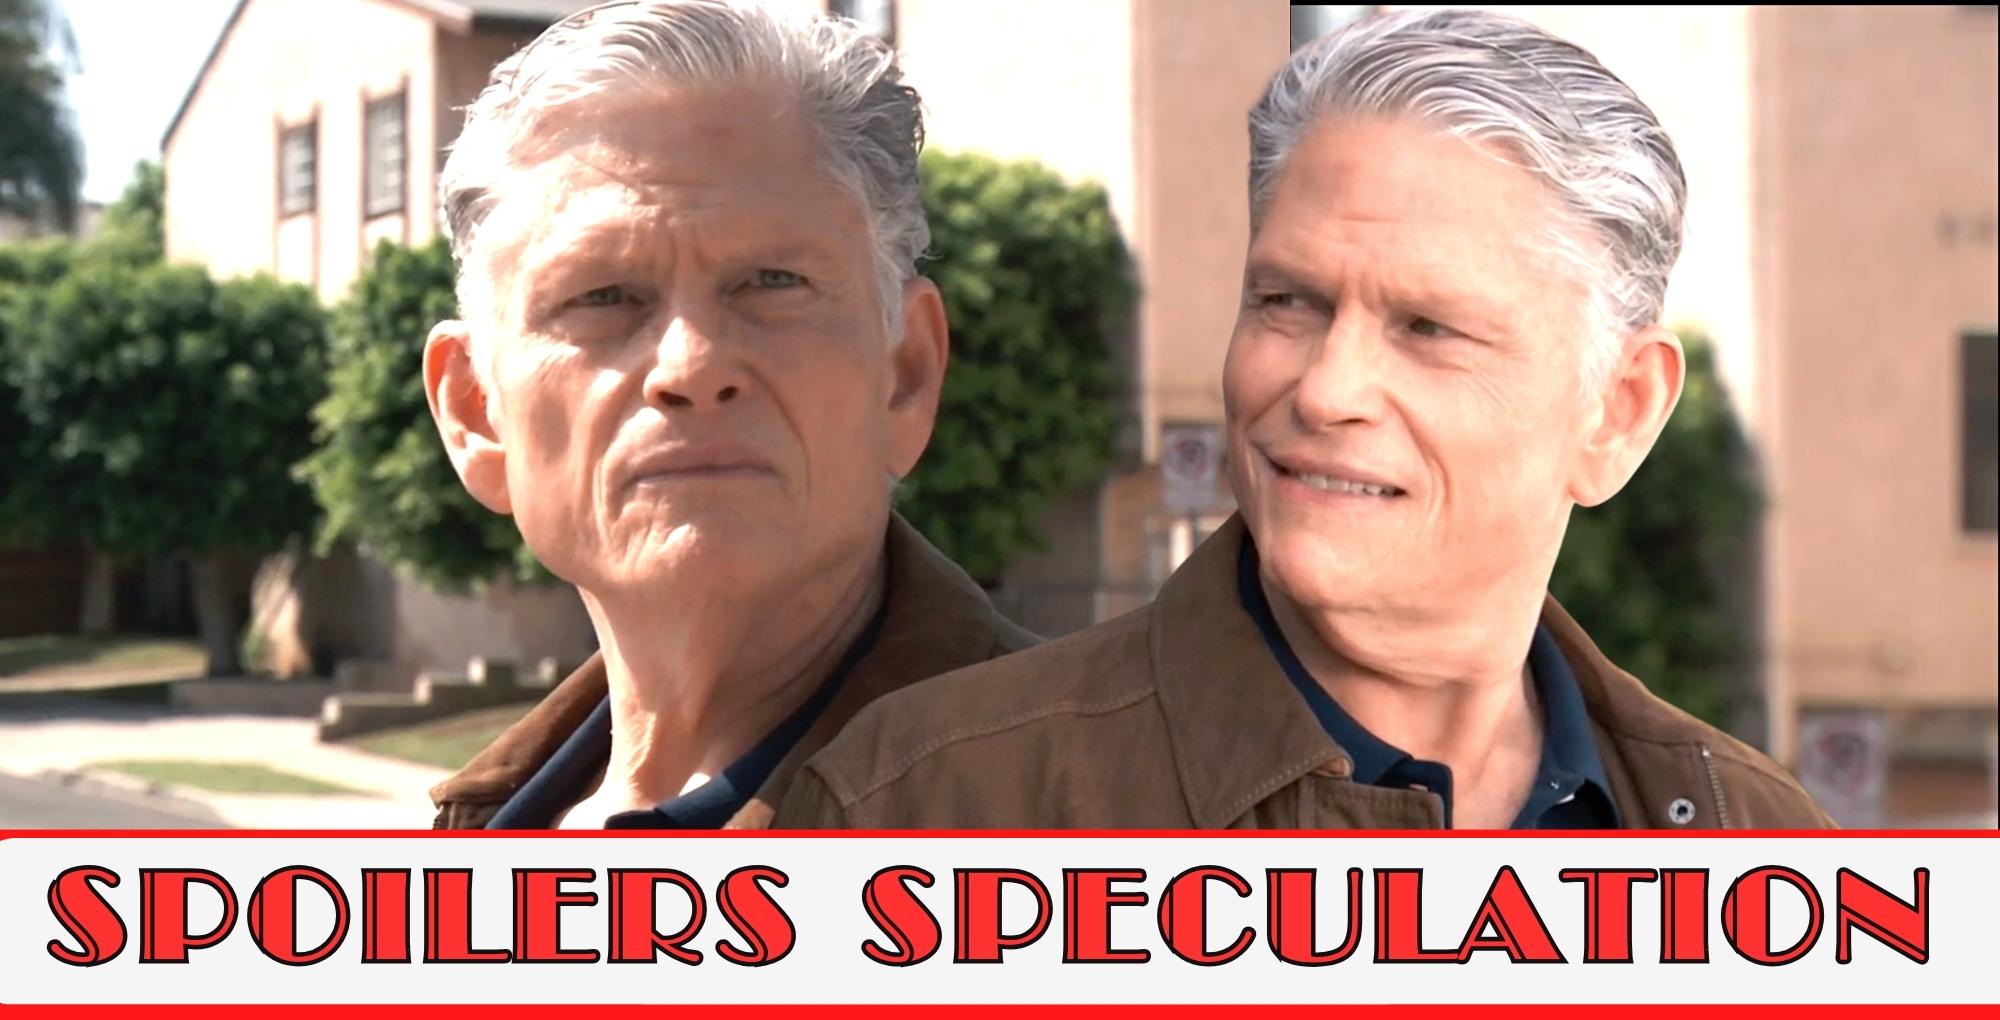 gh spoilers speculation banner over two images of cyrus.